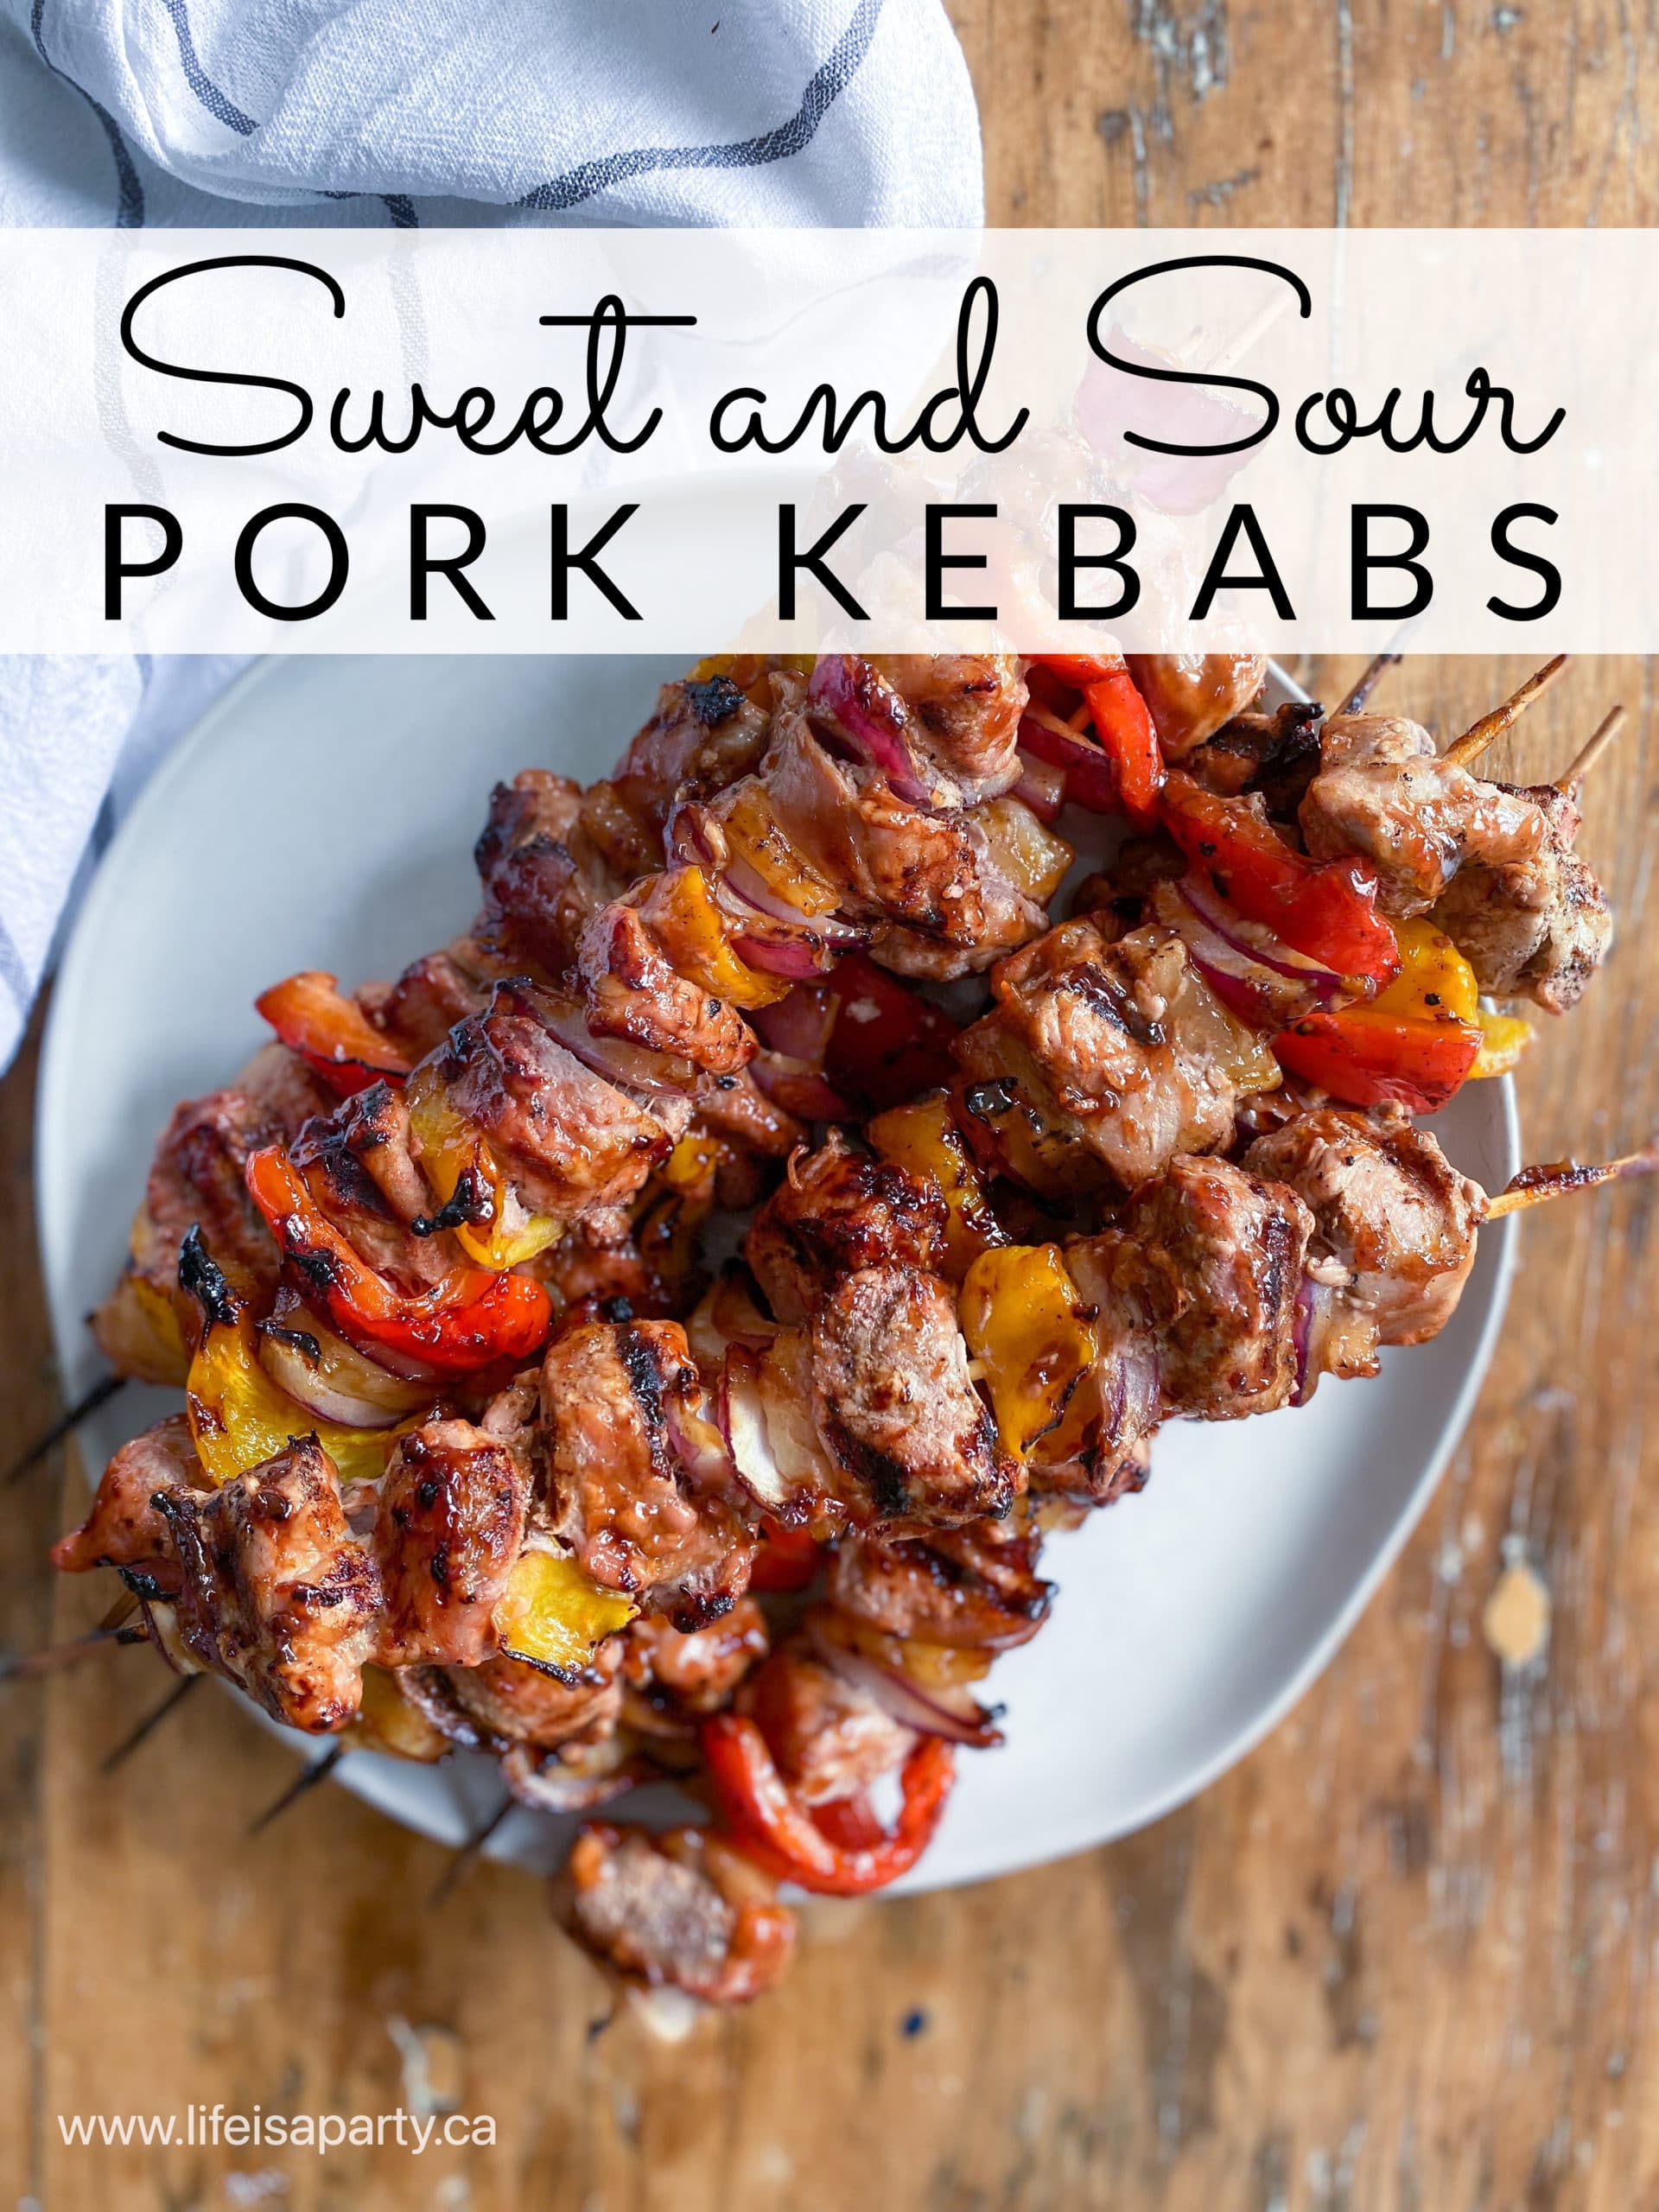 Sweet and Sour Pork Kababs